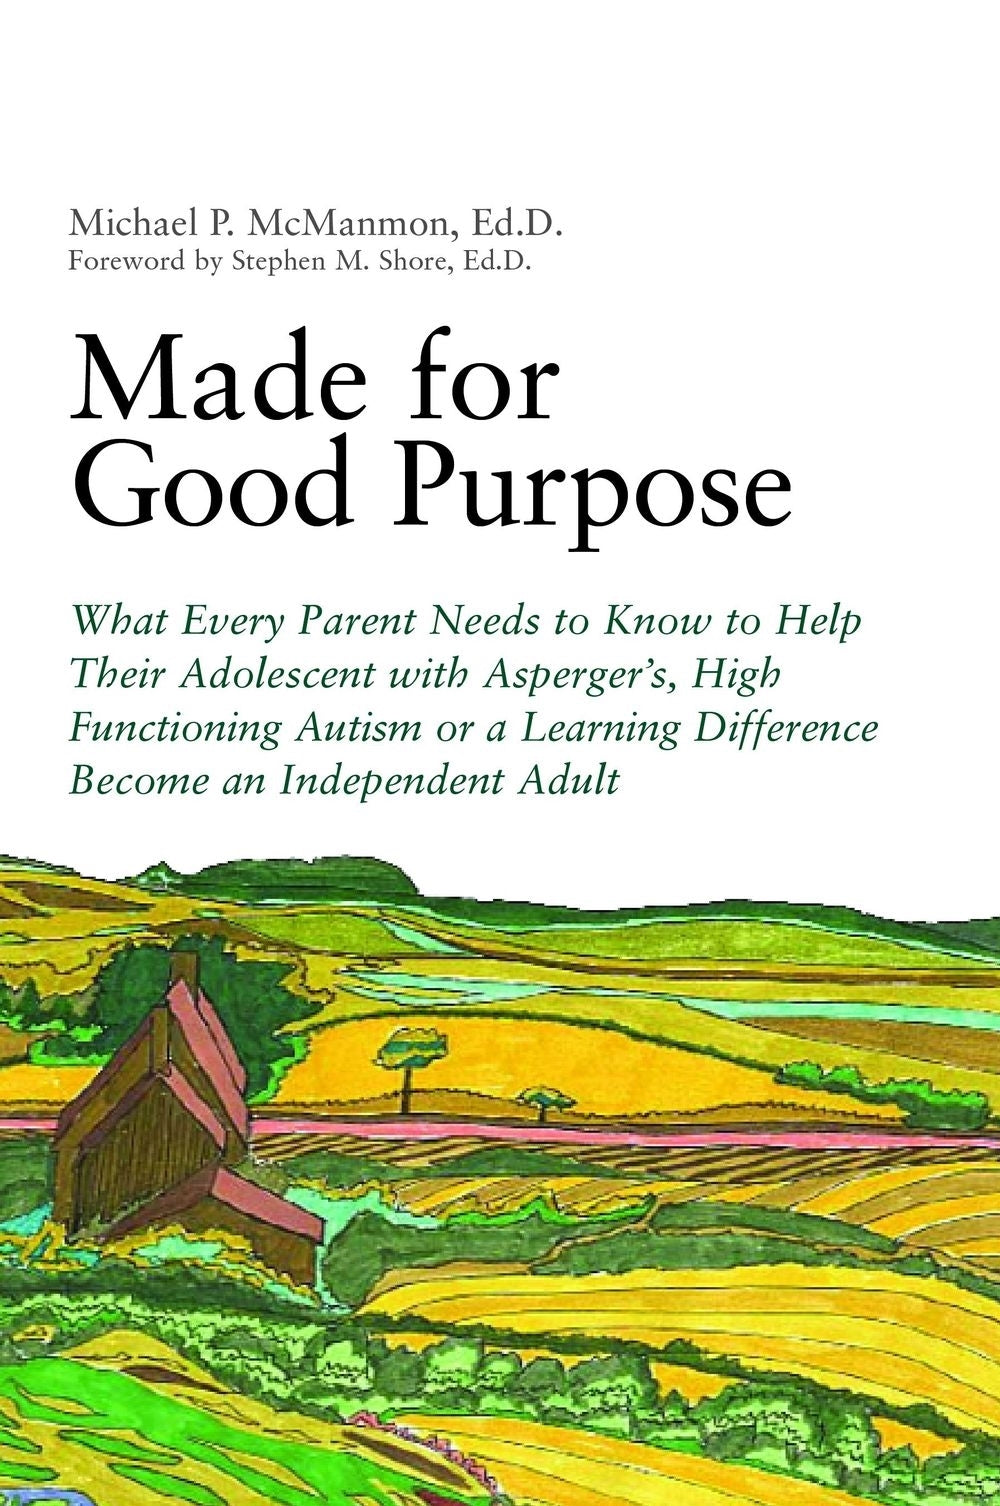 Made for Good Purpose by Stephen Shore, Michael McManmon